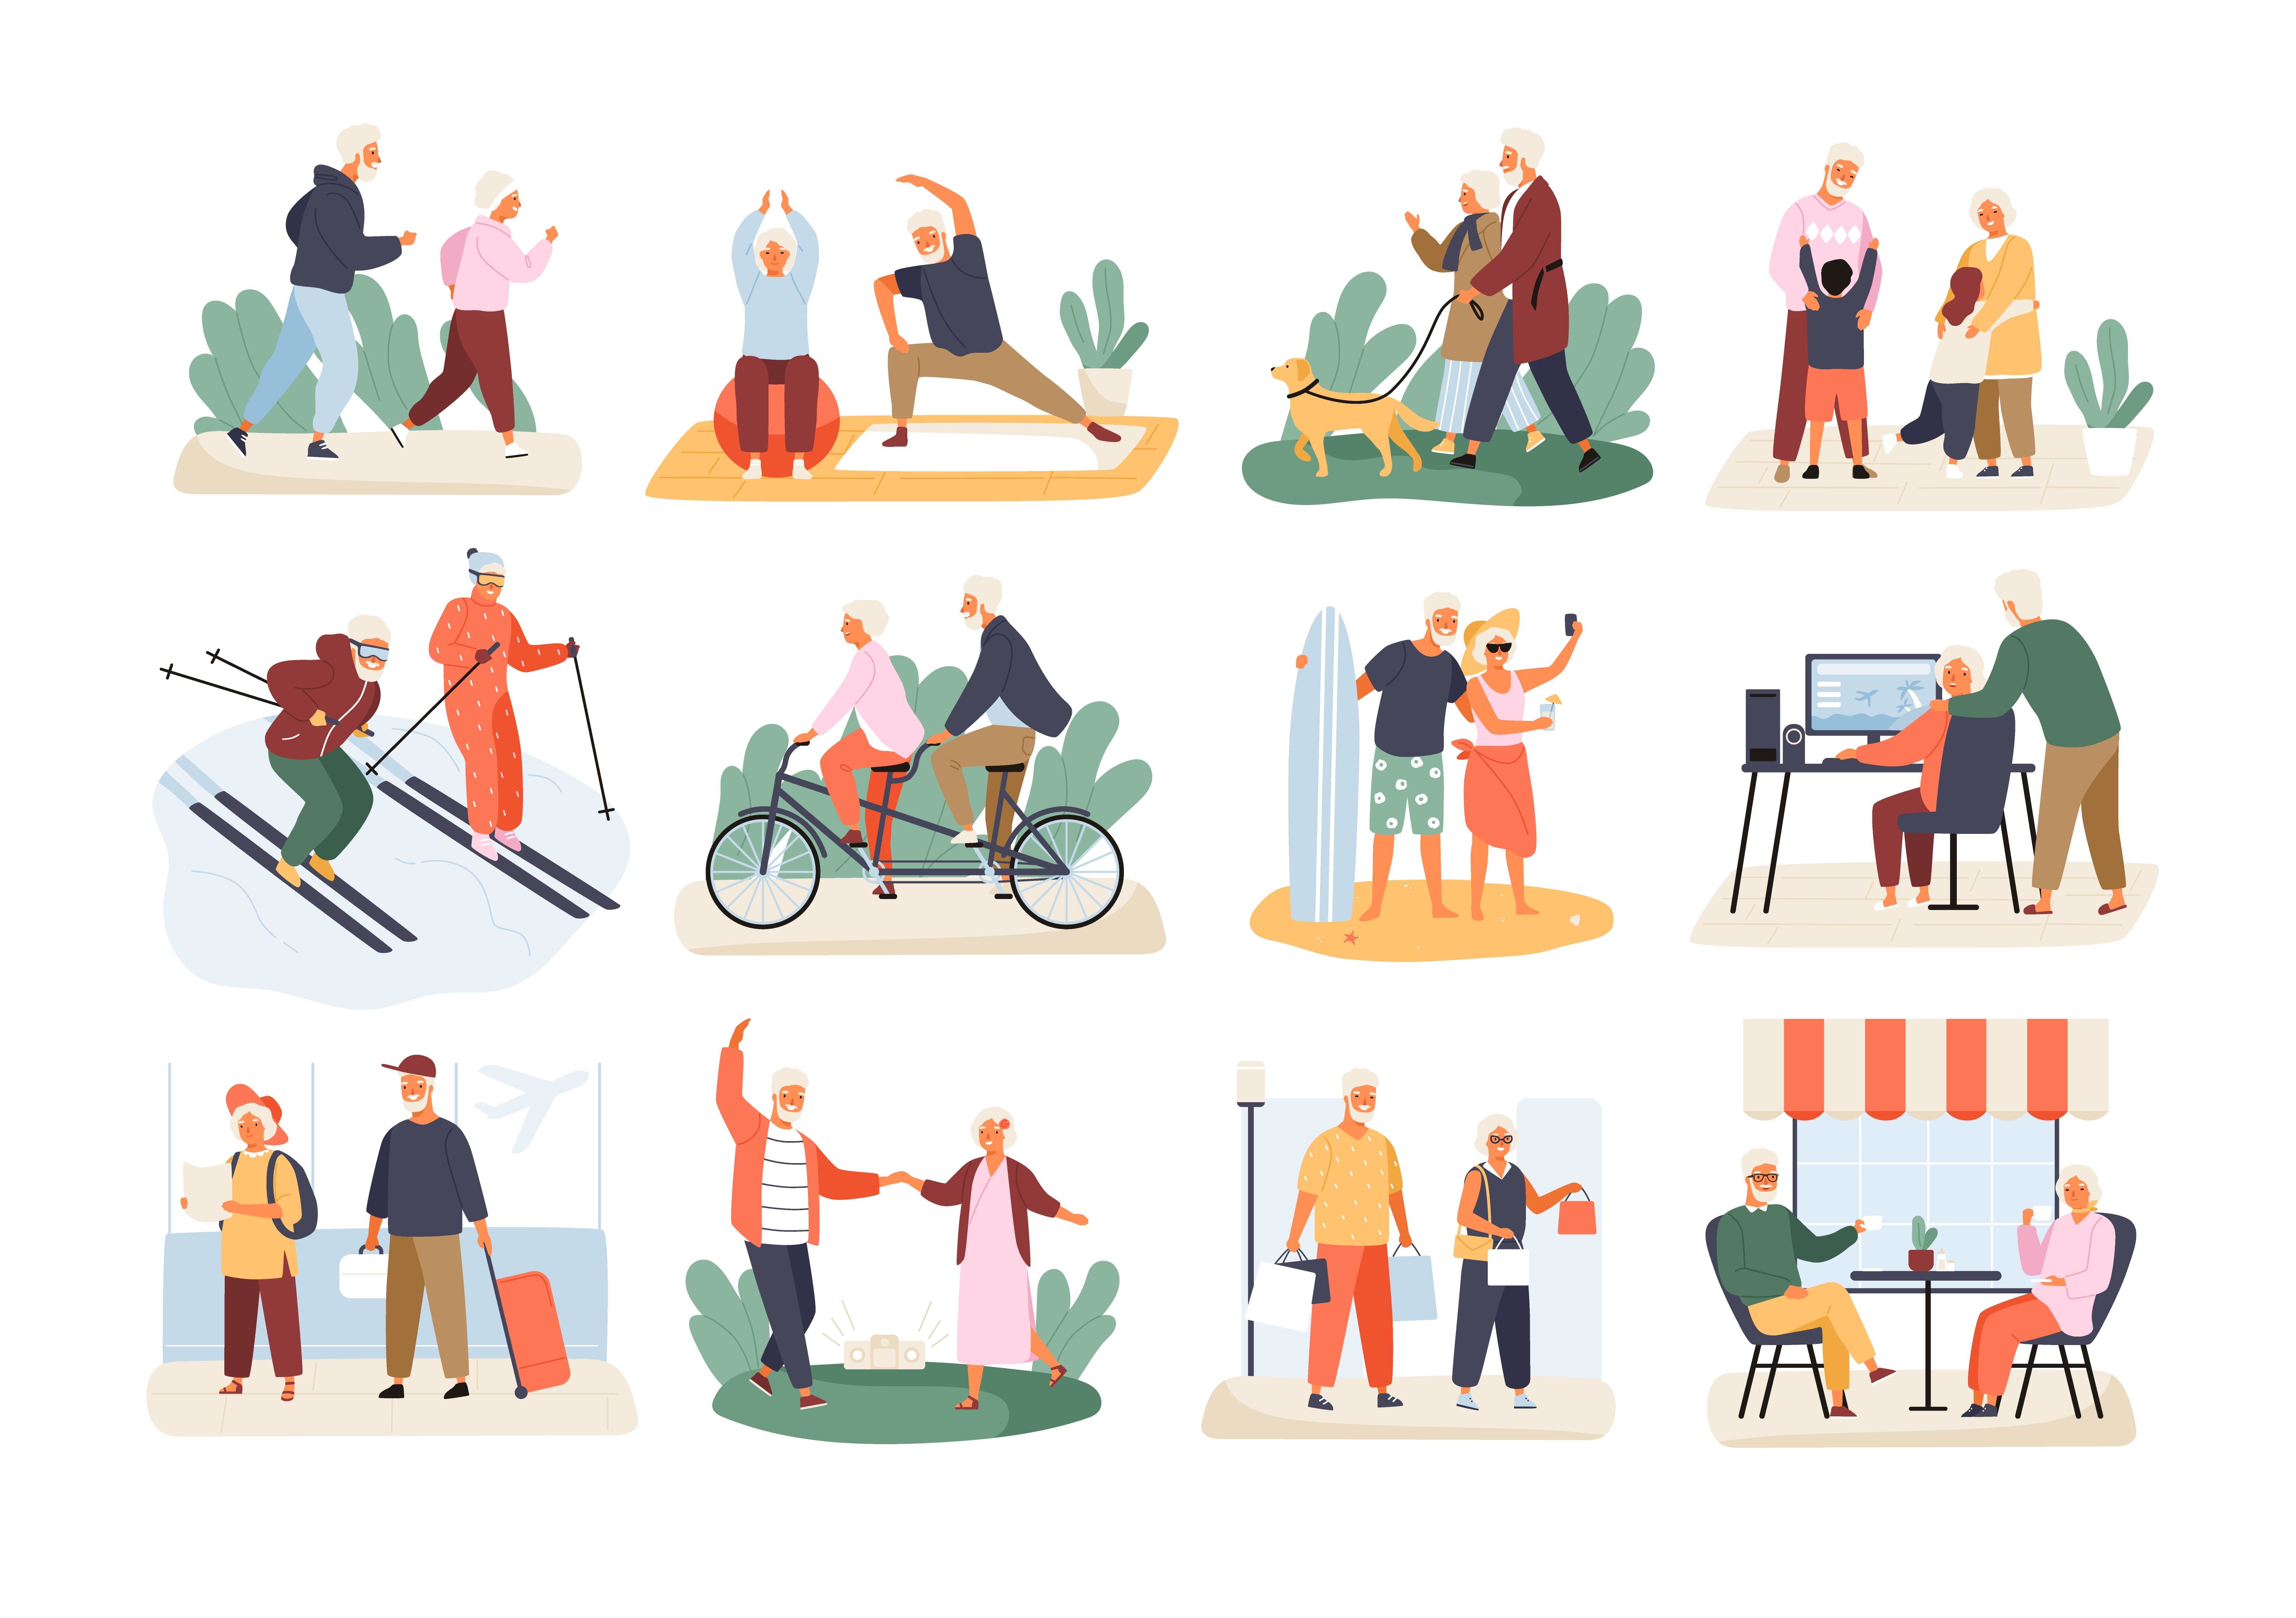 Vector illustrating an elderly couple doing various activities indoors and outdoors such as enjoying a cafe or surfing